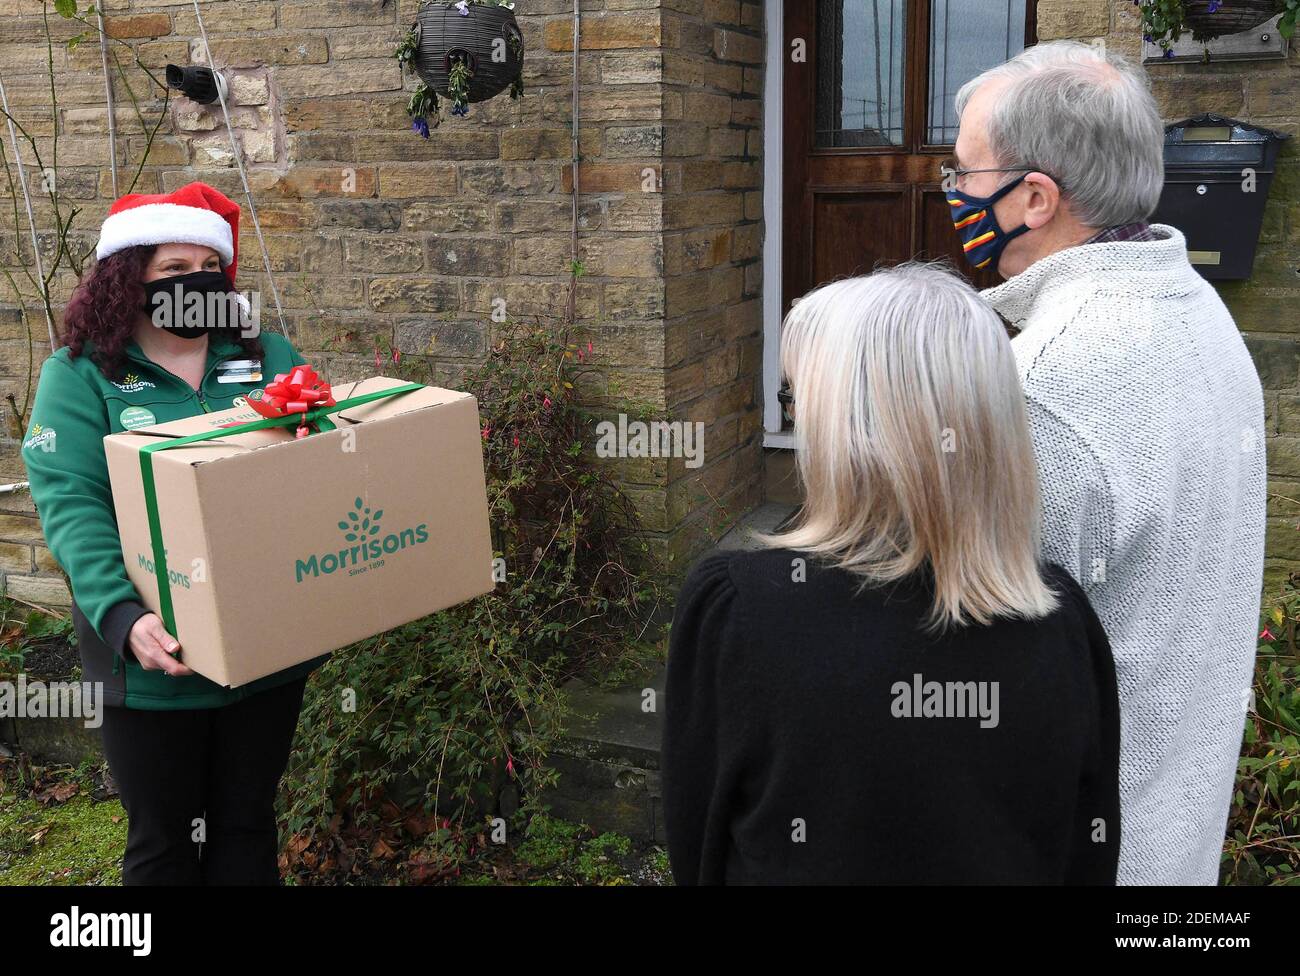 EDITORIAL USE ONLY A staff member delivers 'The Christmas Dinner for Two Box' from Morrisons supermarket, which can be ordered from its new dedicated Doorstep Deliveries phone line, enabling vulnerable or self-isolating customers to order their groceries and have them hand-delivered from their local store. Stock Photo